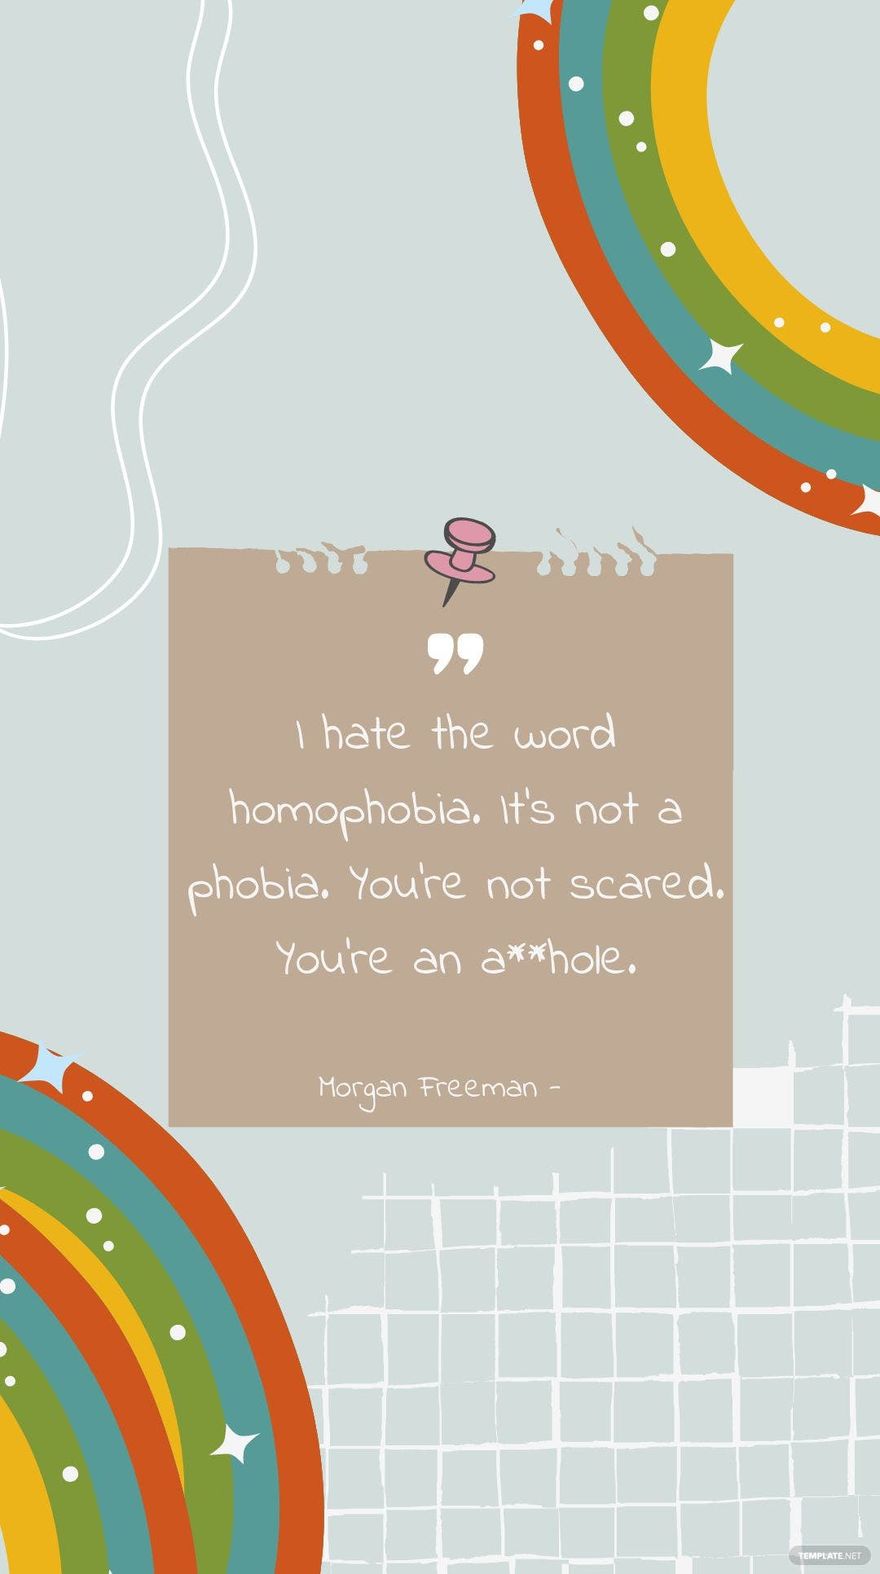 Morgan Freeman - I hate the word homophobia. It’s not a phobia. You’re not scared. You’re an a**hole.